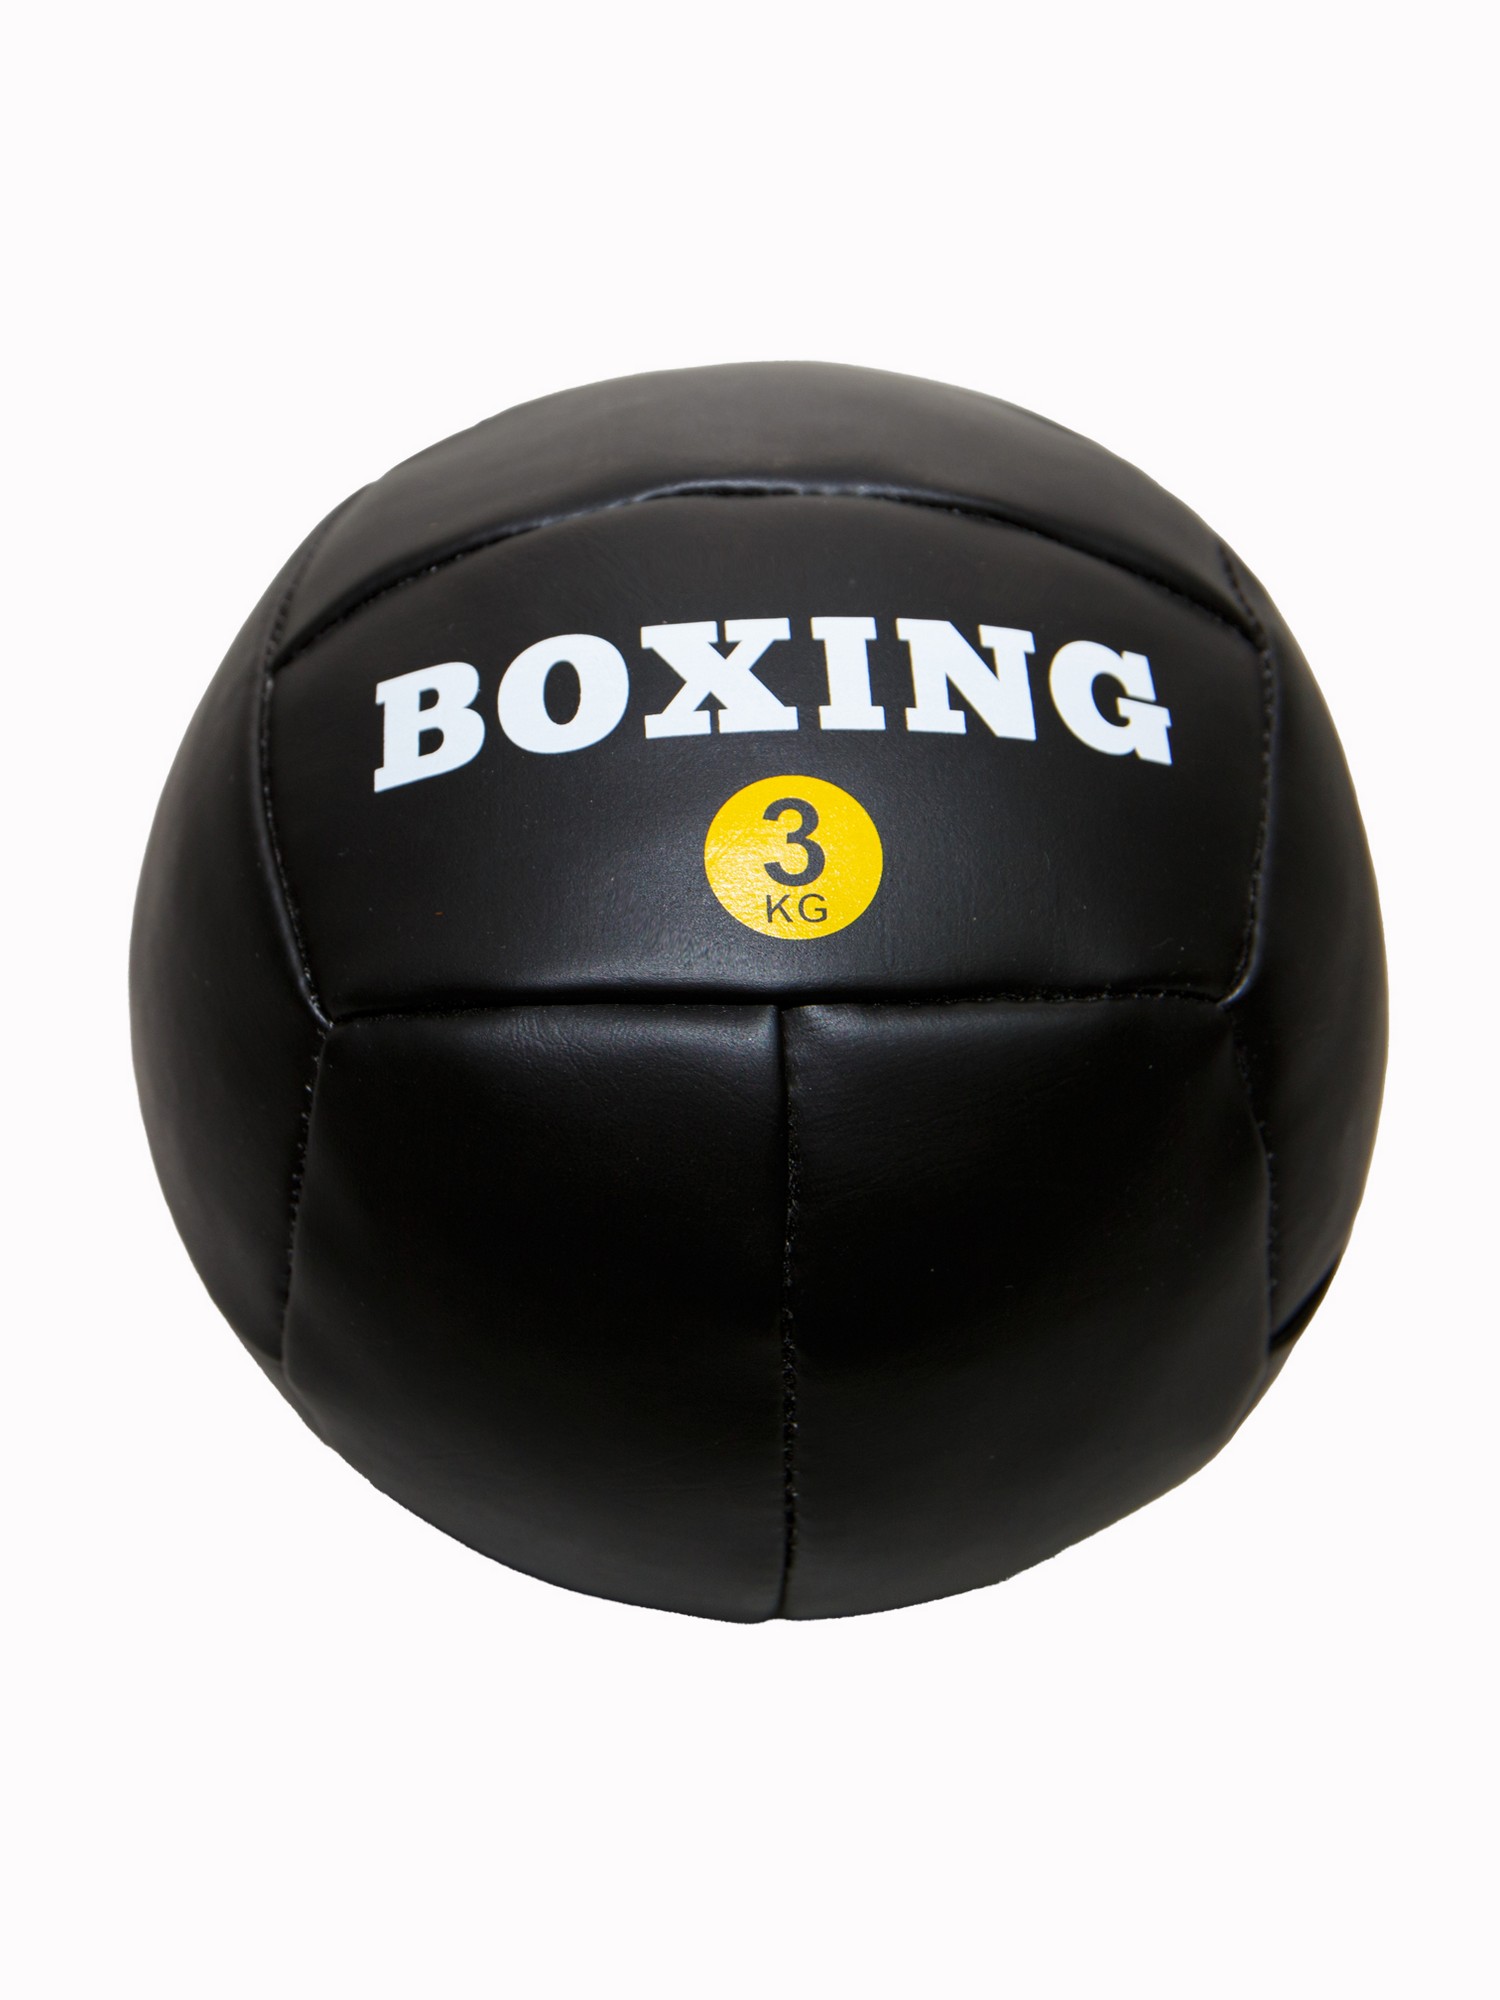 Медицинбол 3кг Totalbox Boxing МДИБ-3 1500_2000